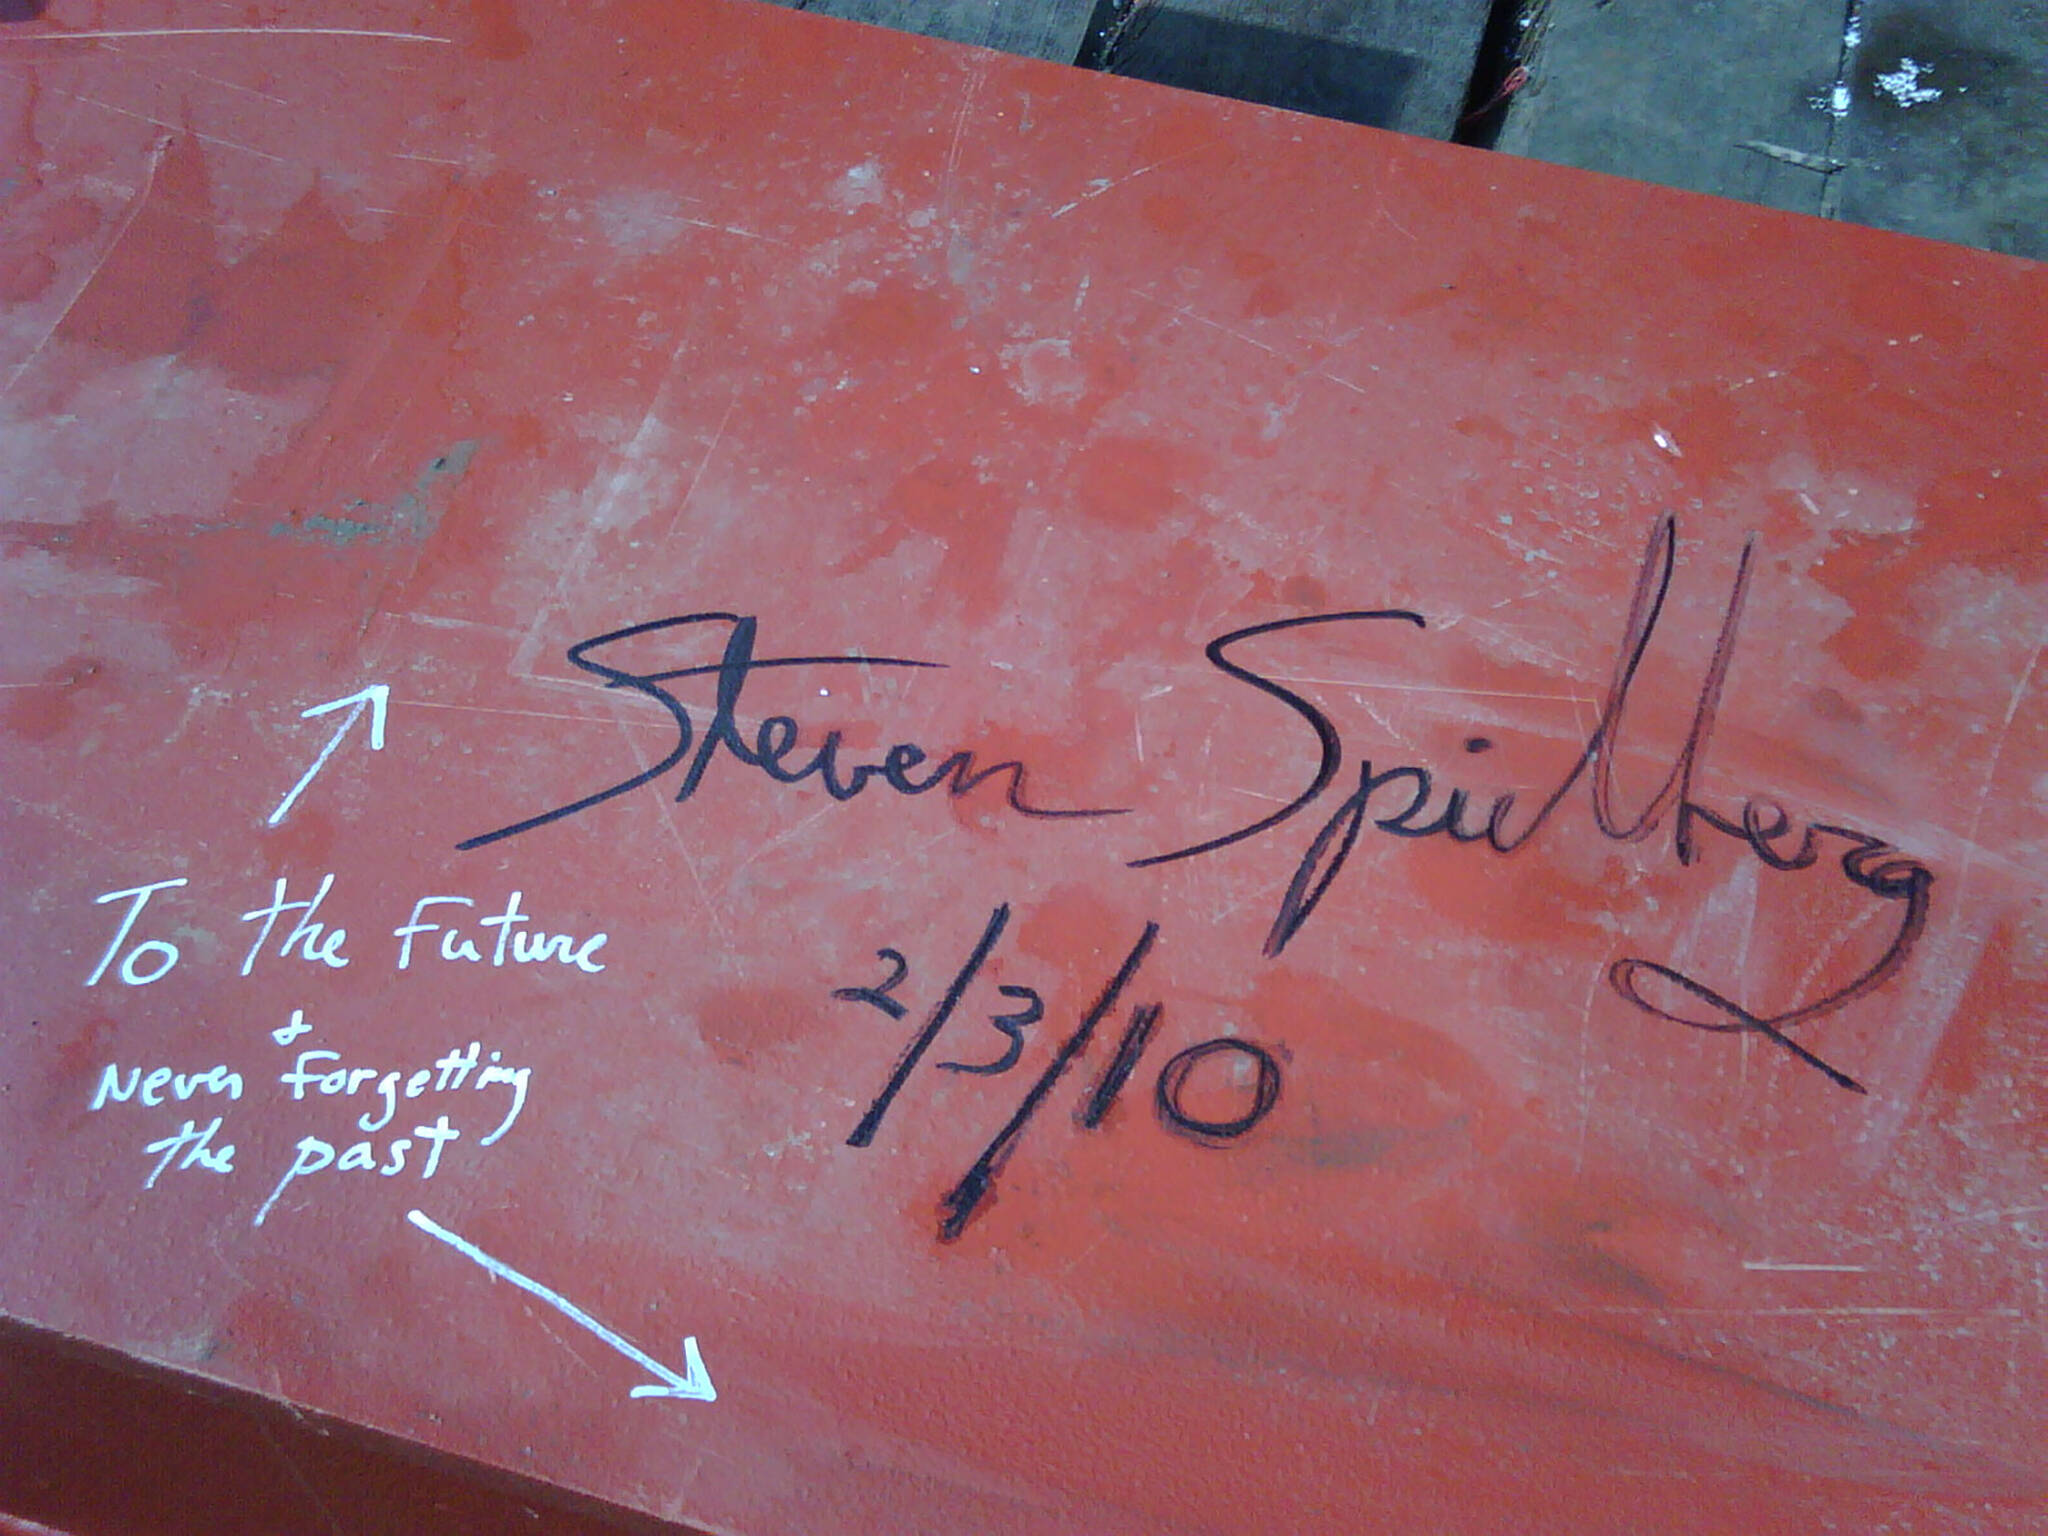 Steven Spielberg signature on one of the columns of the Ground Zero area rebuilding project for the Rising: Rebuilding Ground Zero documentary Co-produced by Danny Forster and Steven Spielberg about the rebuilding of the World Trade Center site in the wake of 9/11.